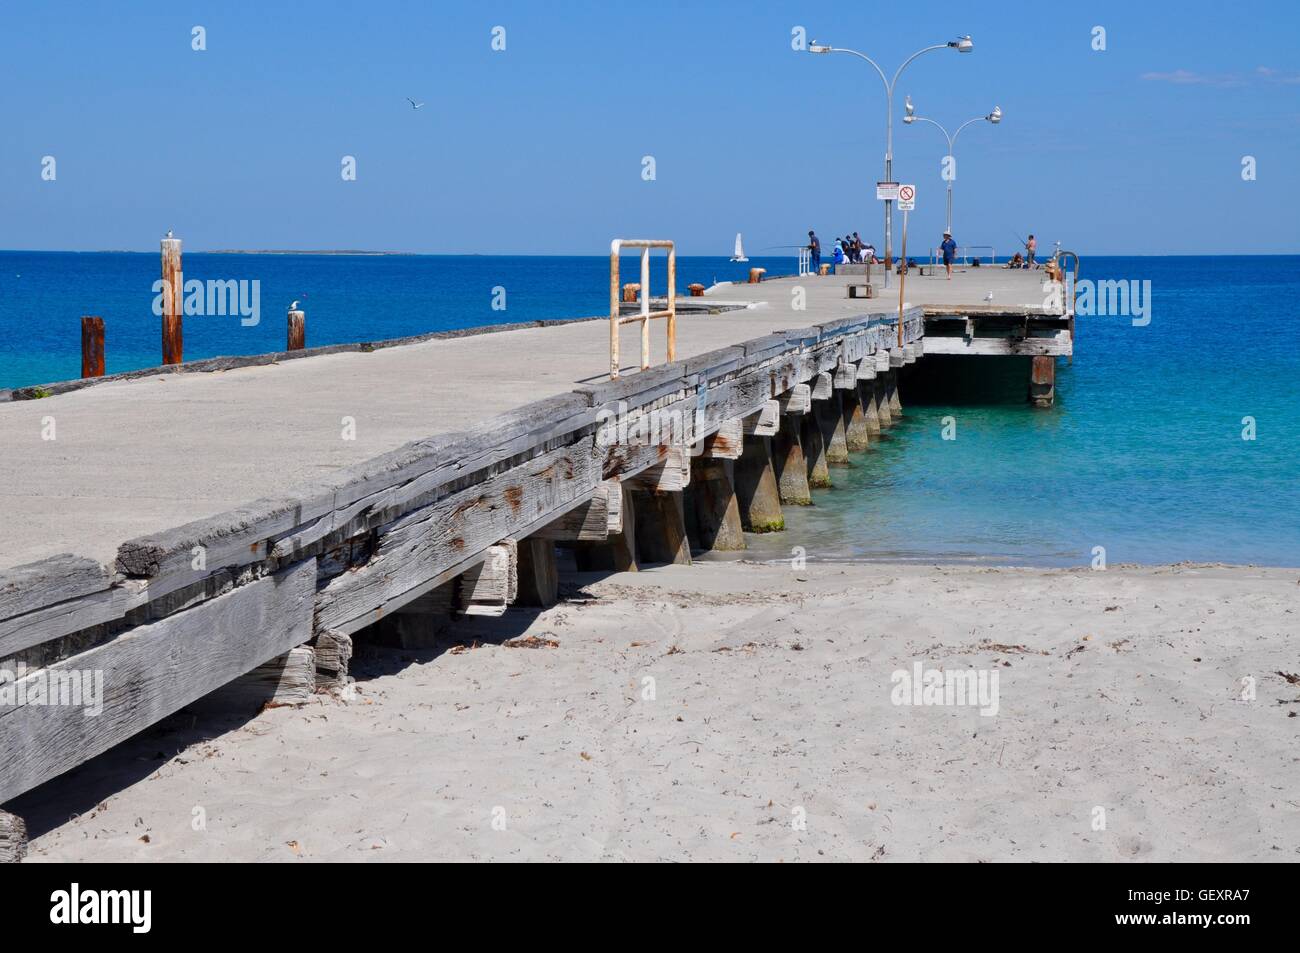 Coogee,WA,Australia-November 13,2015:Coogee Beach jetty with fisherman and the Indian Ocean seascape in Coogee,Western Australia. Stock Photo